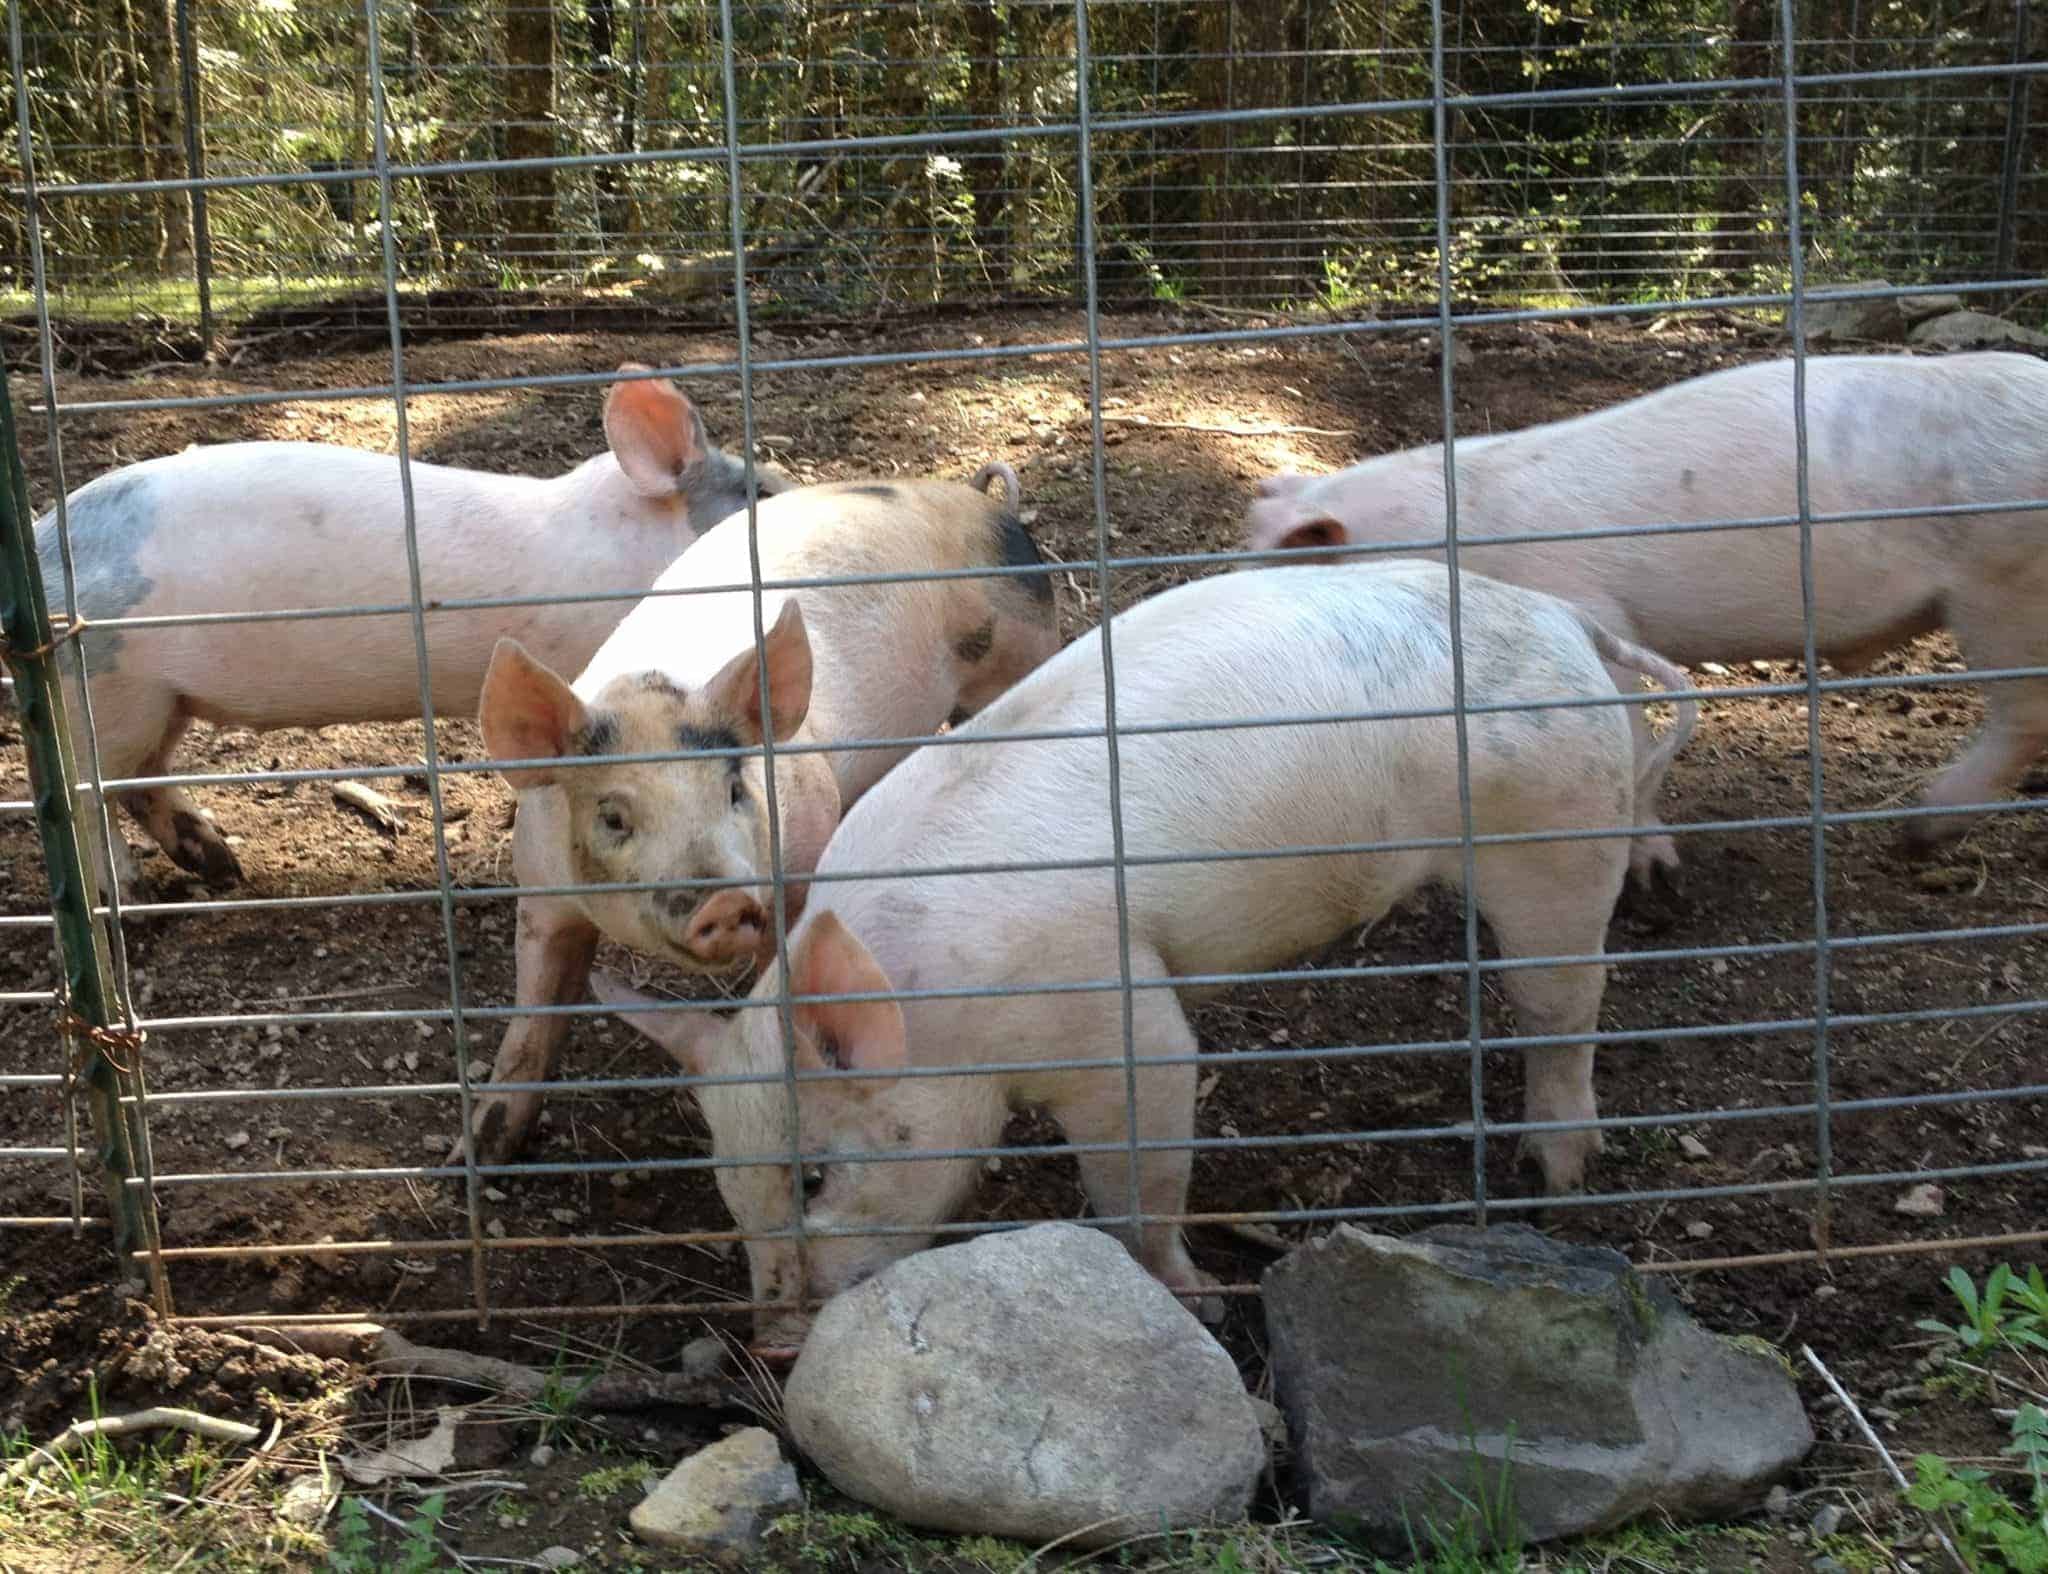 Pigs playing in a pig pen.